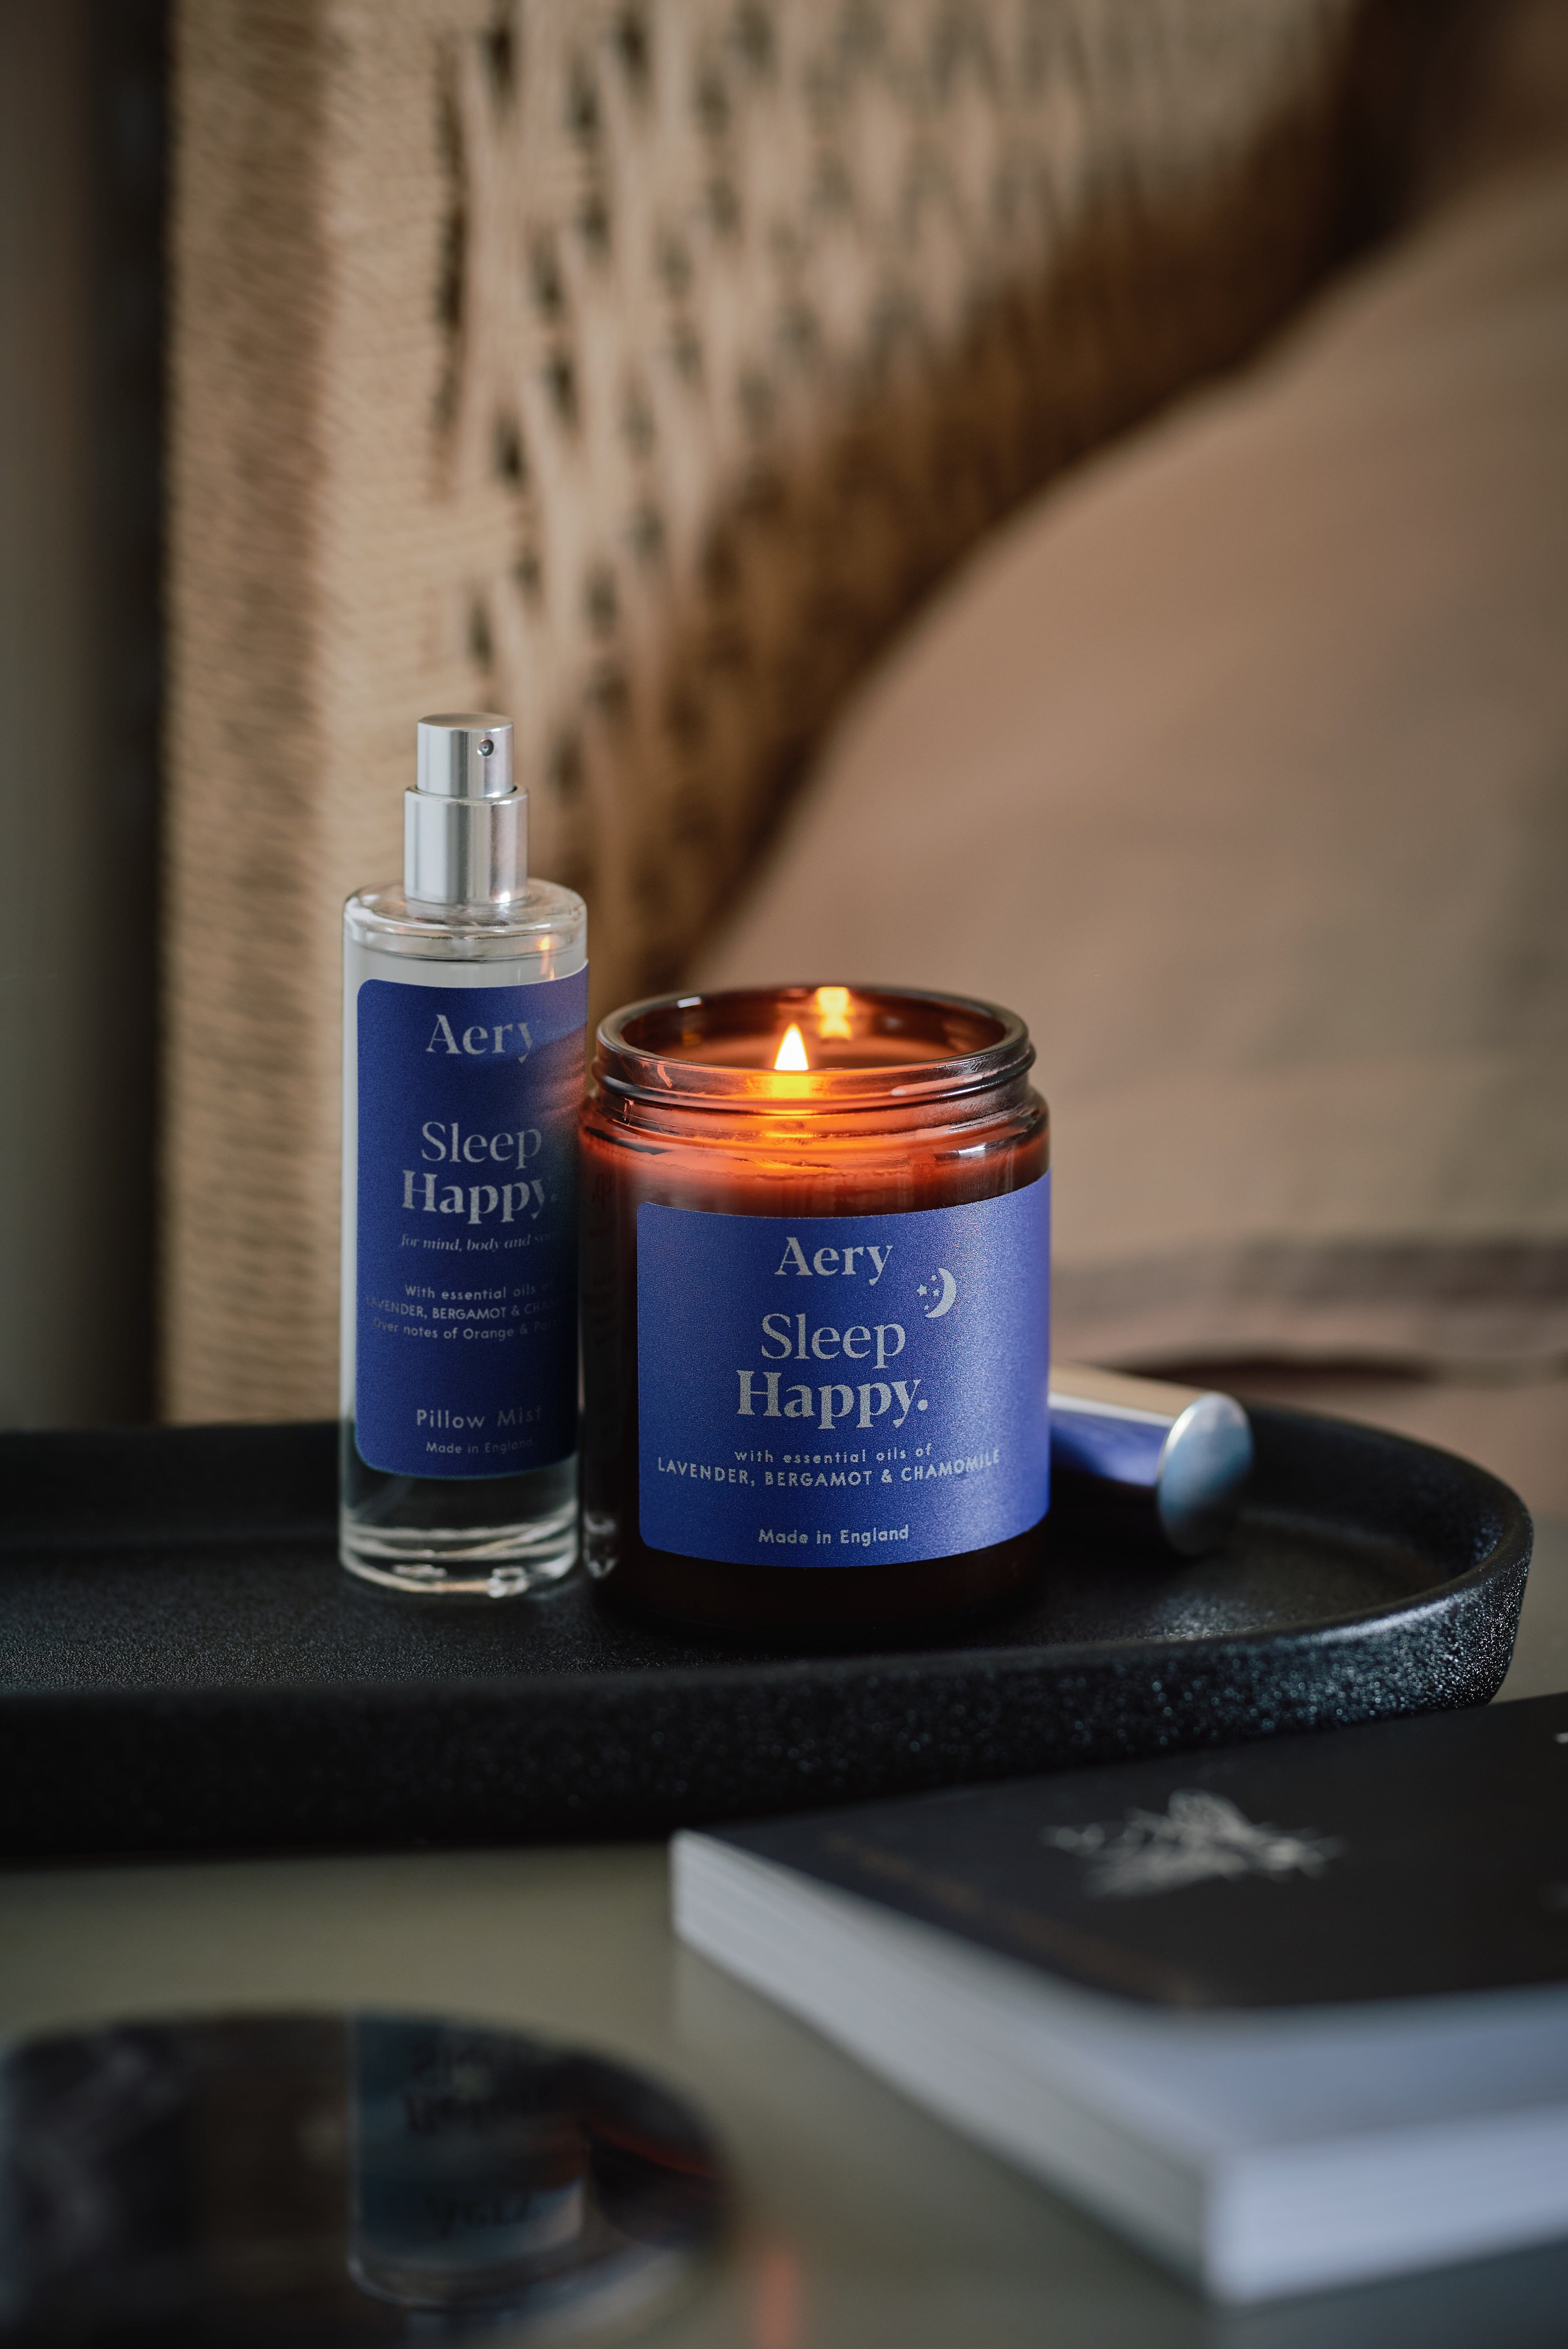 Blue Sleep Happy jar candle by Aery displayed next to Sleep Happy pillow mist by Aery placed on black tray on bedside table 